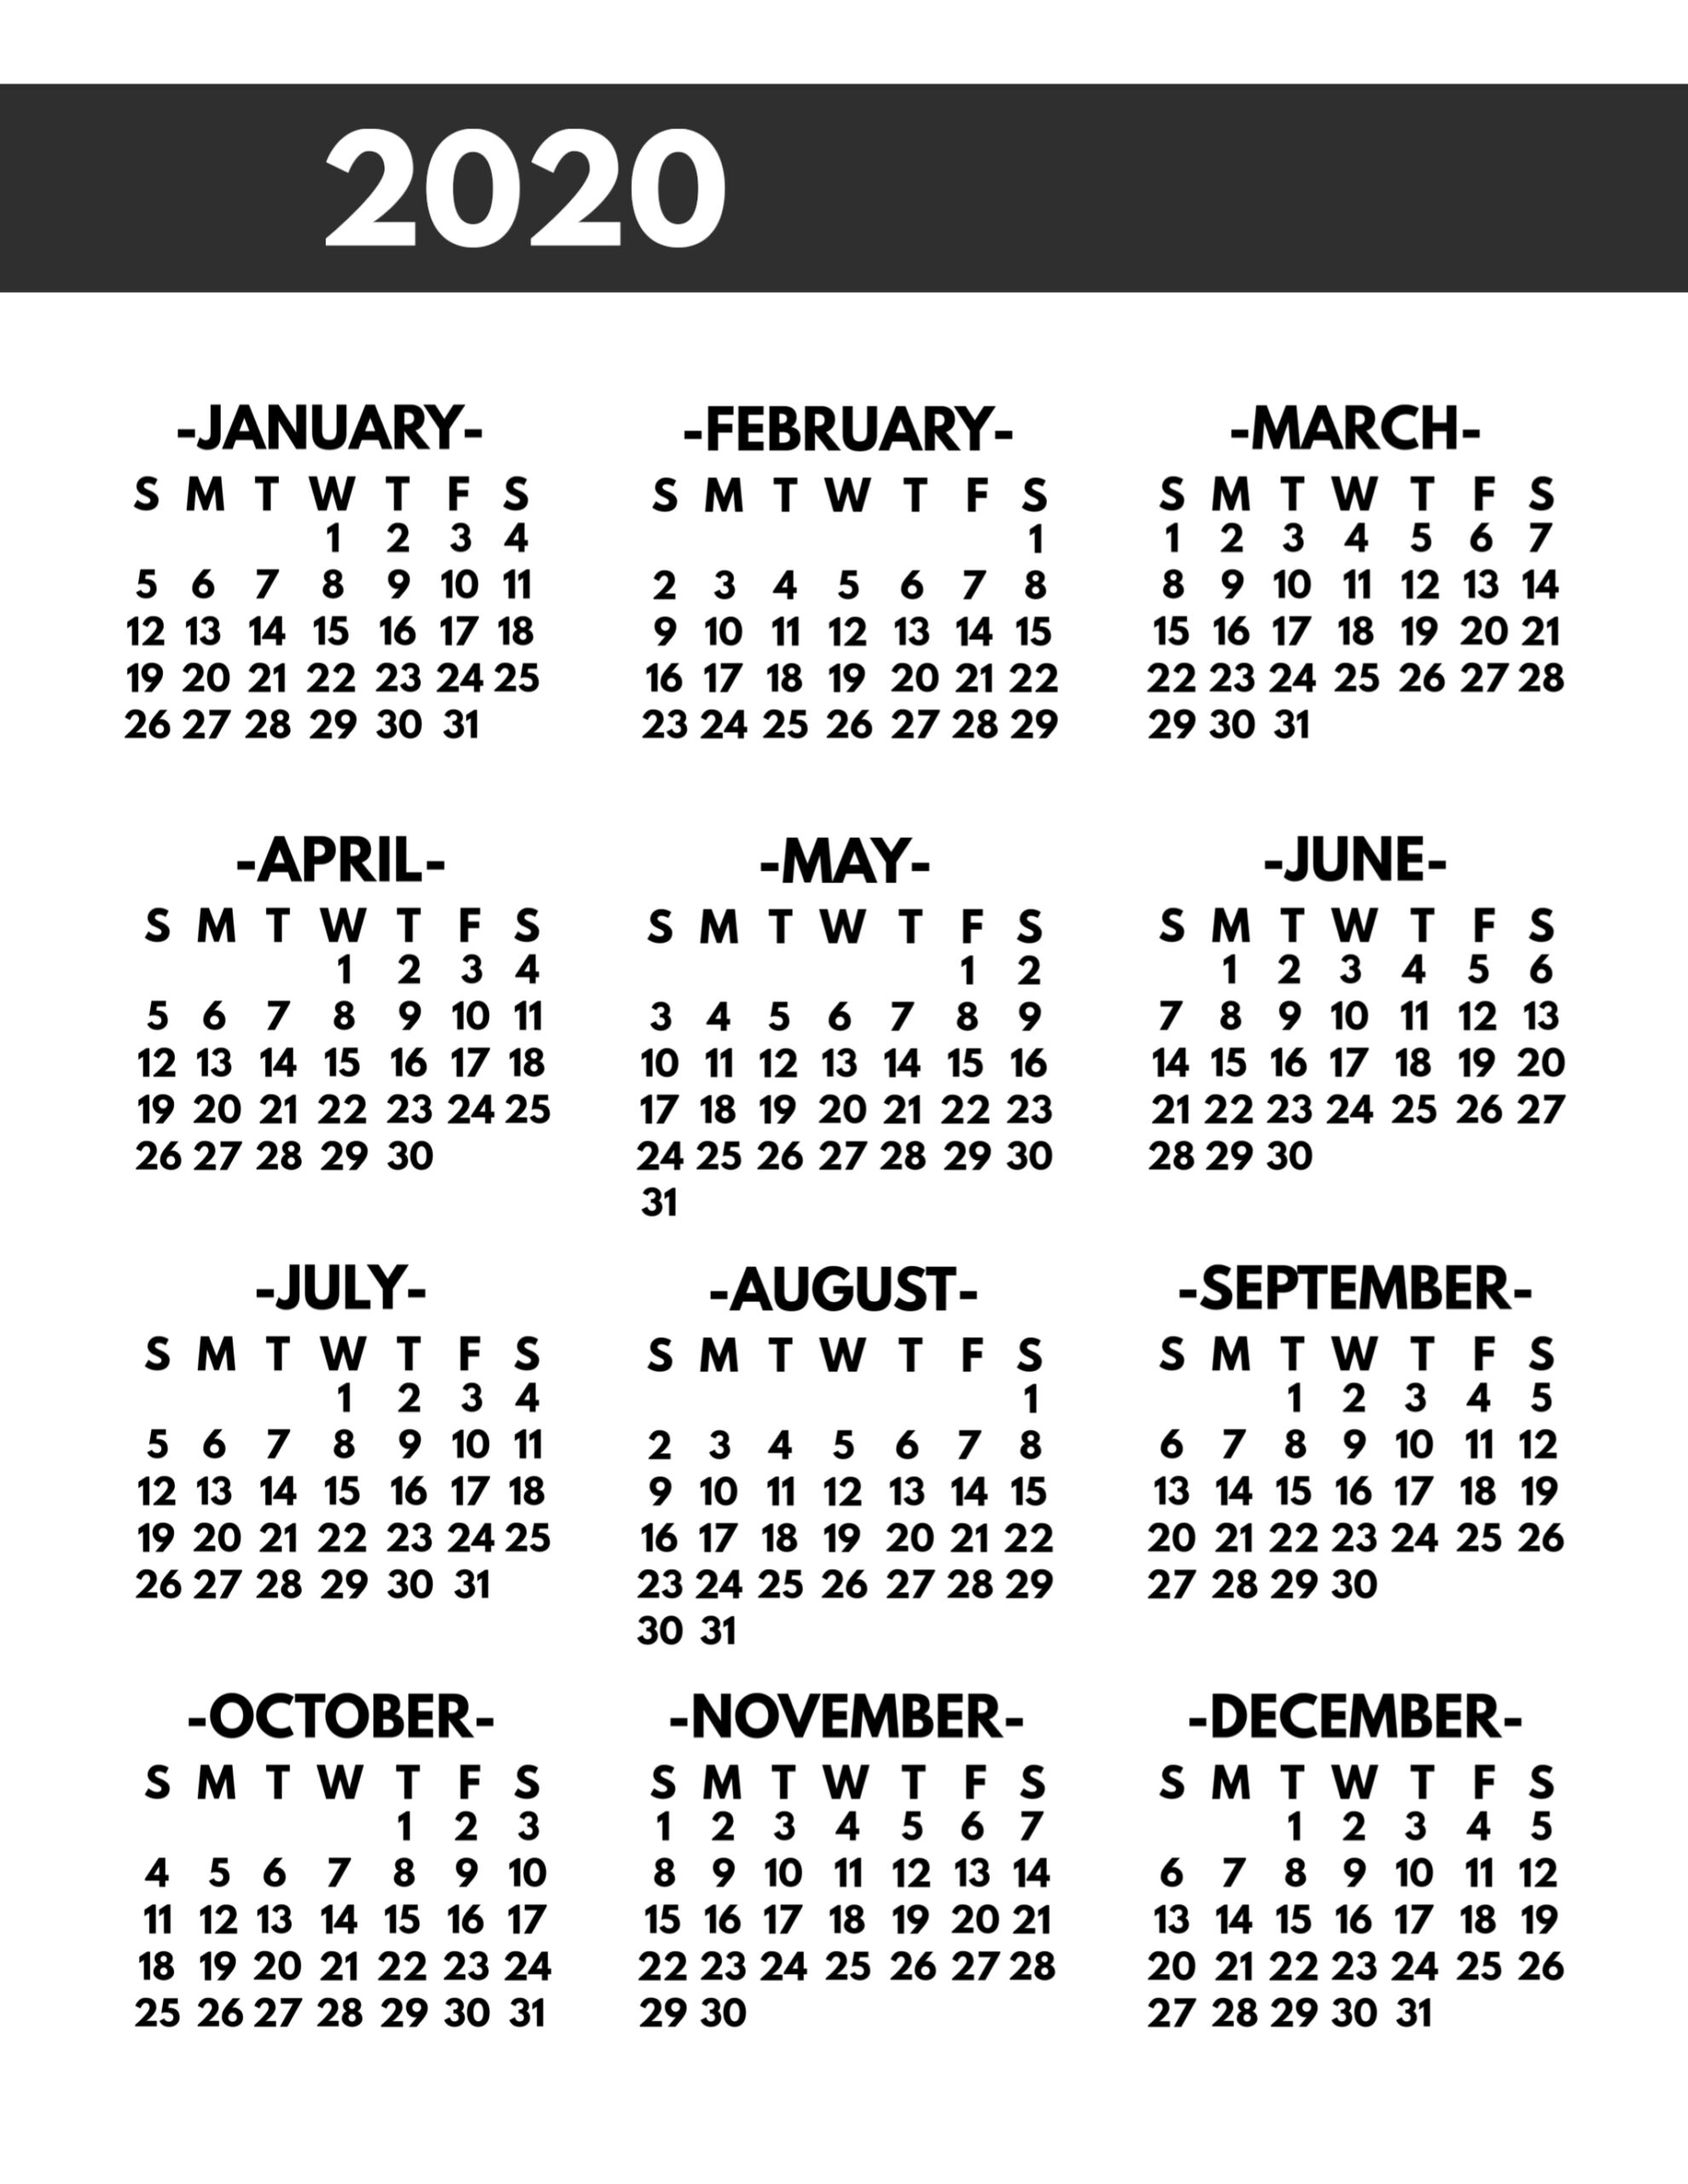 2020 Printable One Page Year At A Glance Calendar - Paper regarding Free Printable Year At A Glance Calendar 2020